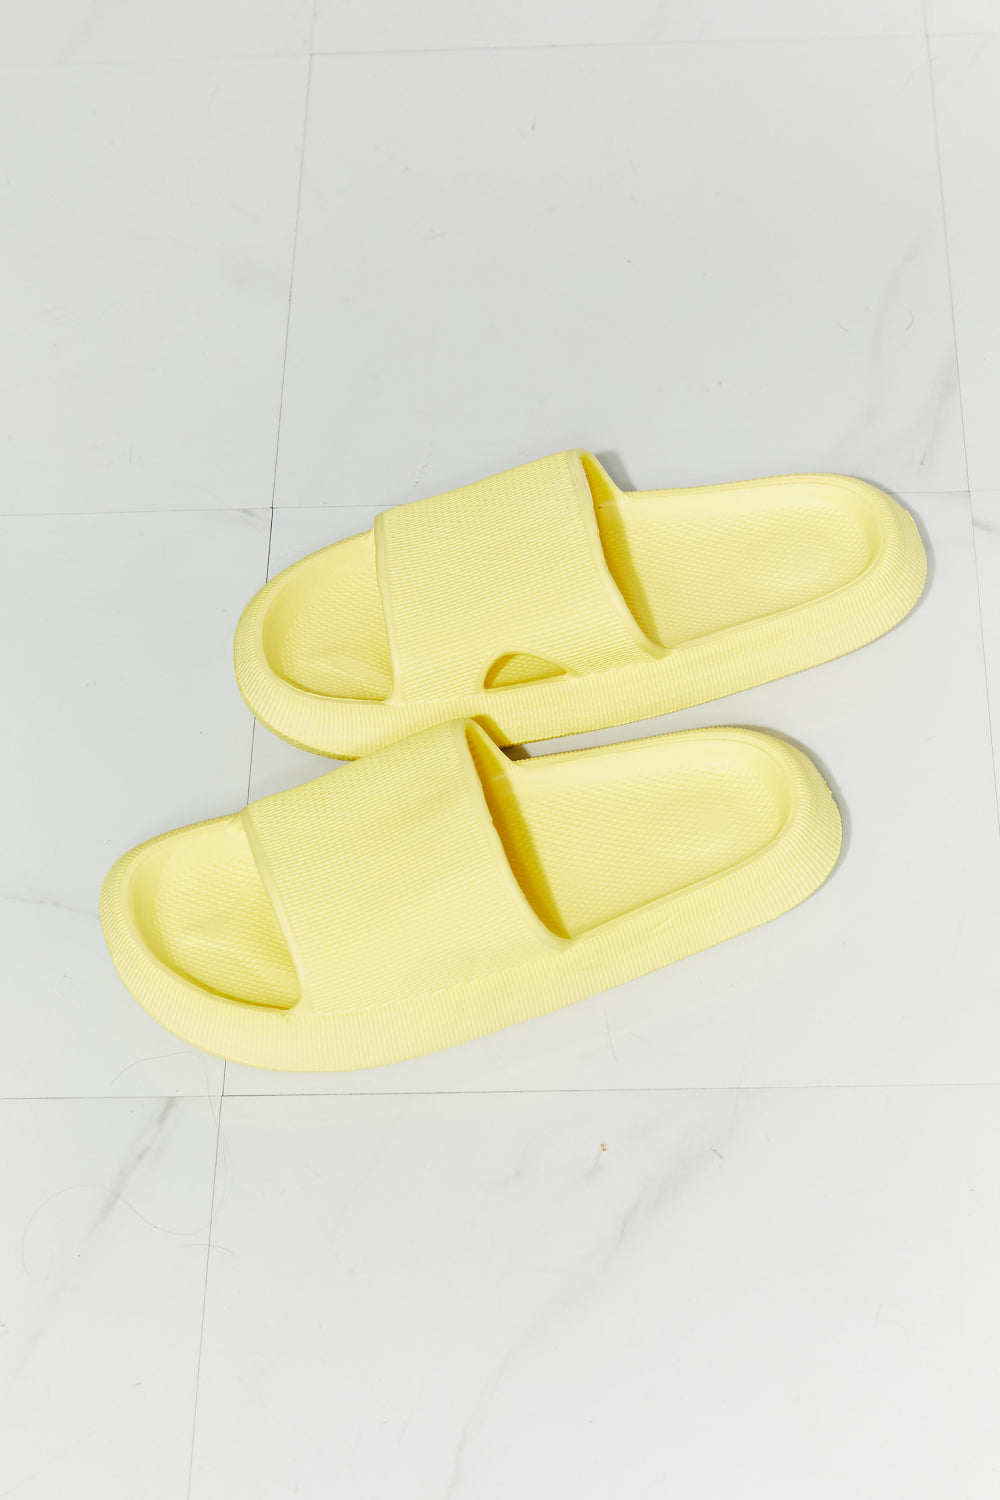 Arms Around Me Open Toe Slide in Yellow  Southern Soul Collectives 